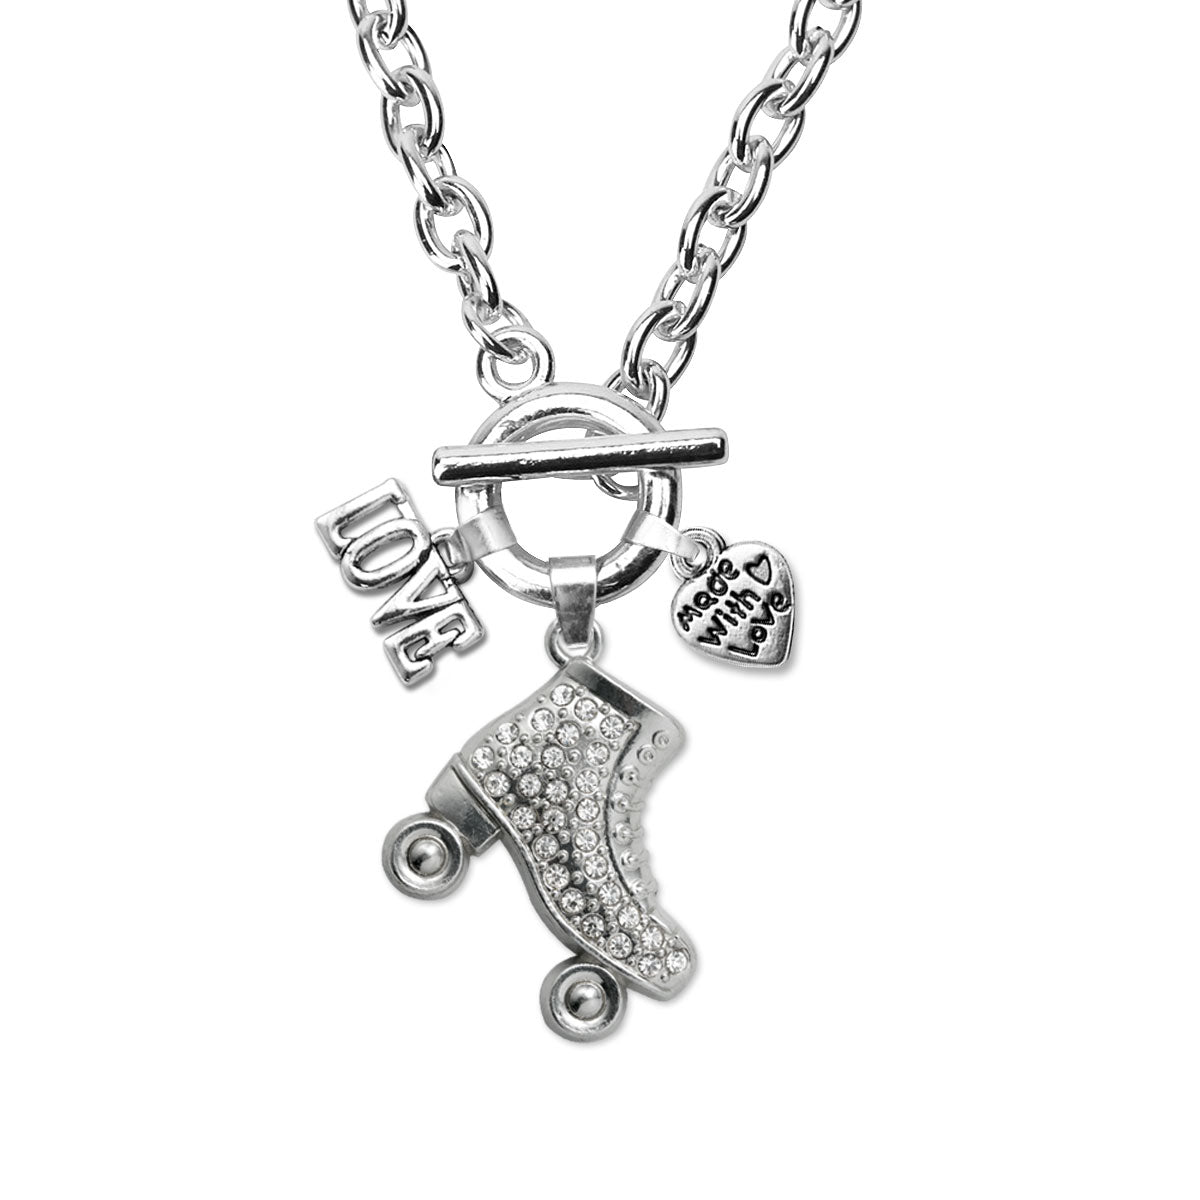 Silver Love Roller Skate Charm Toggle Necklace